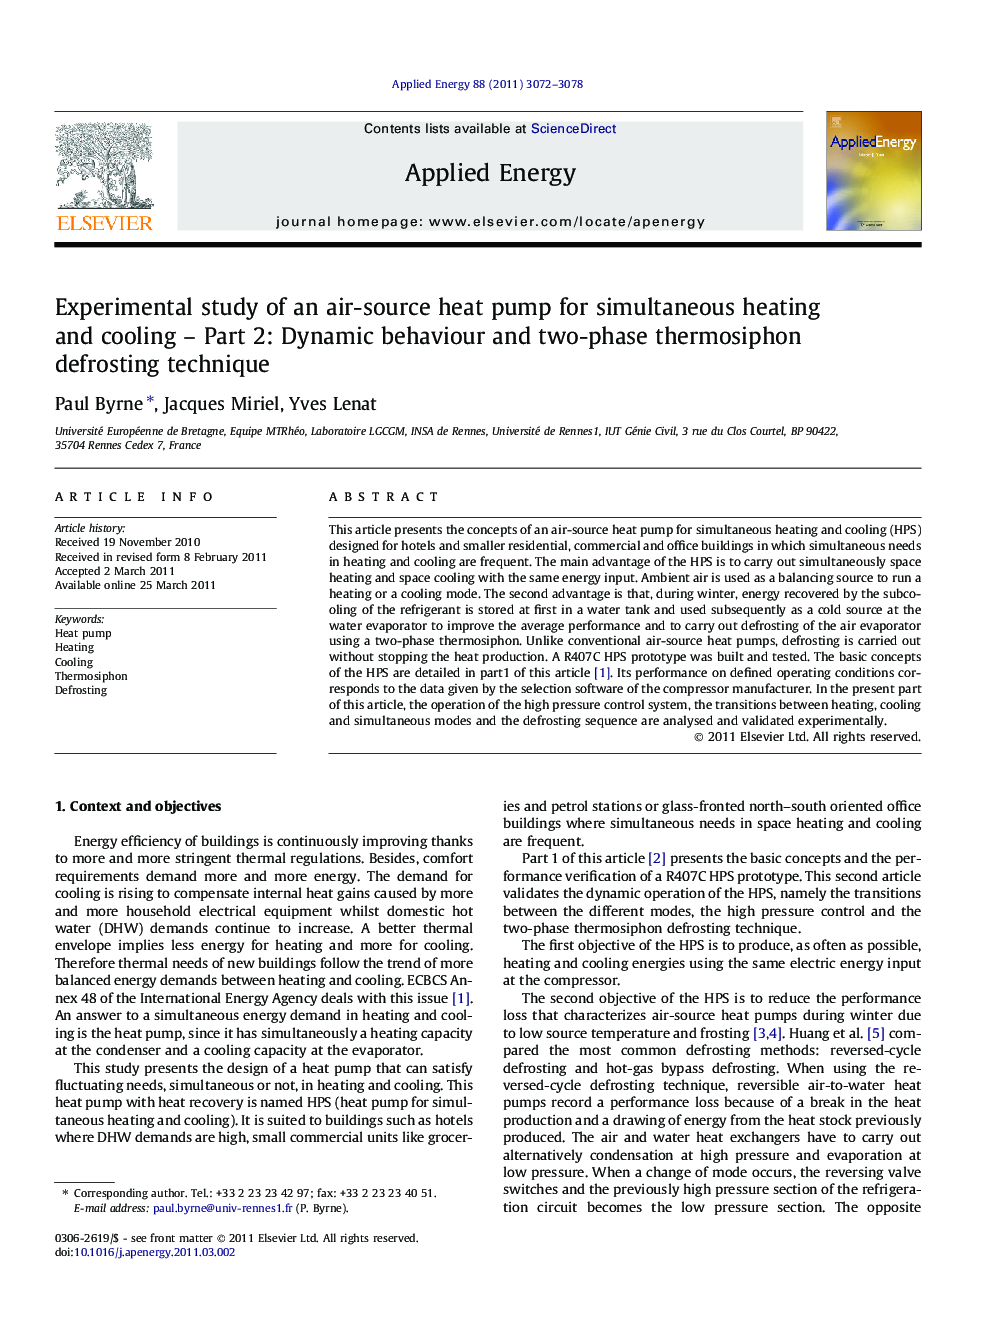 Experimental study of an air-source heat pump for simultaneous heating and cooling – Part 2: Dynamic behaviour and two-phase thermosiphon defrosting technique